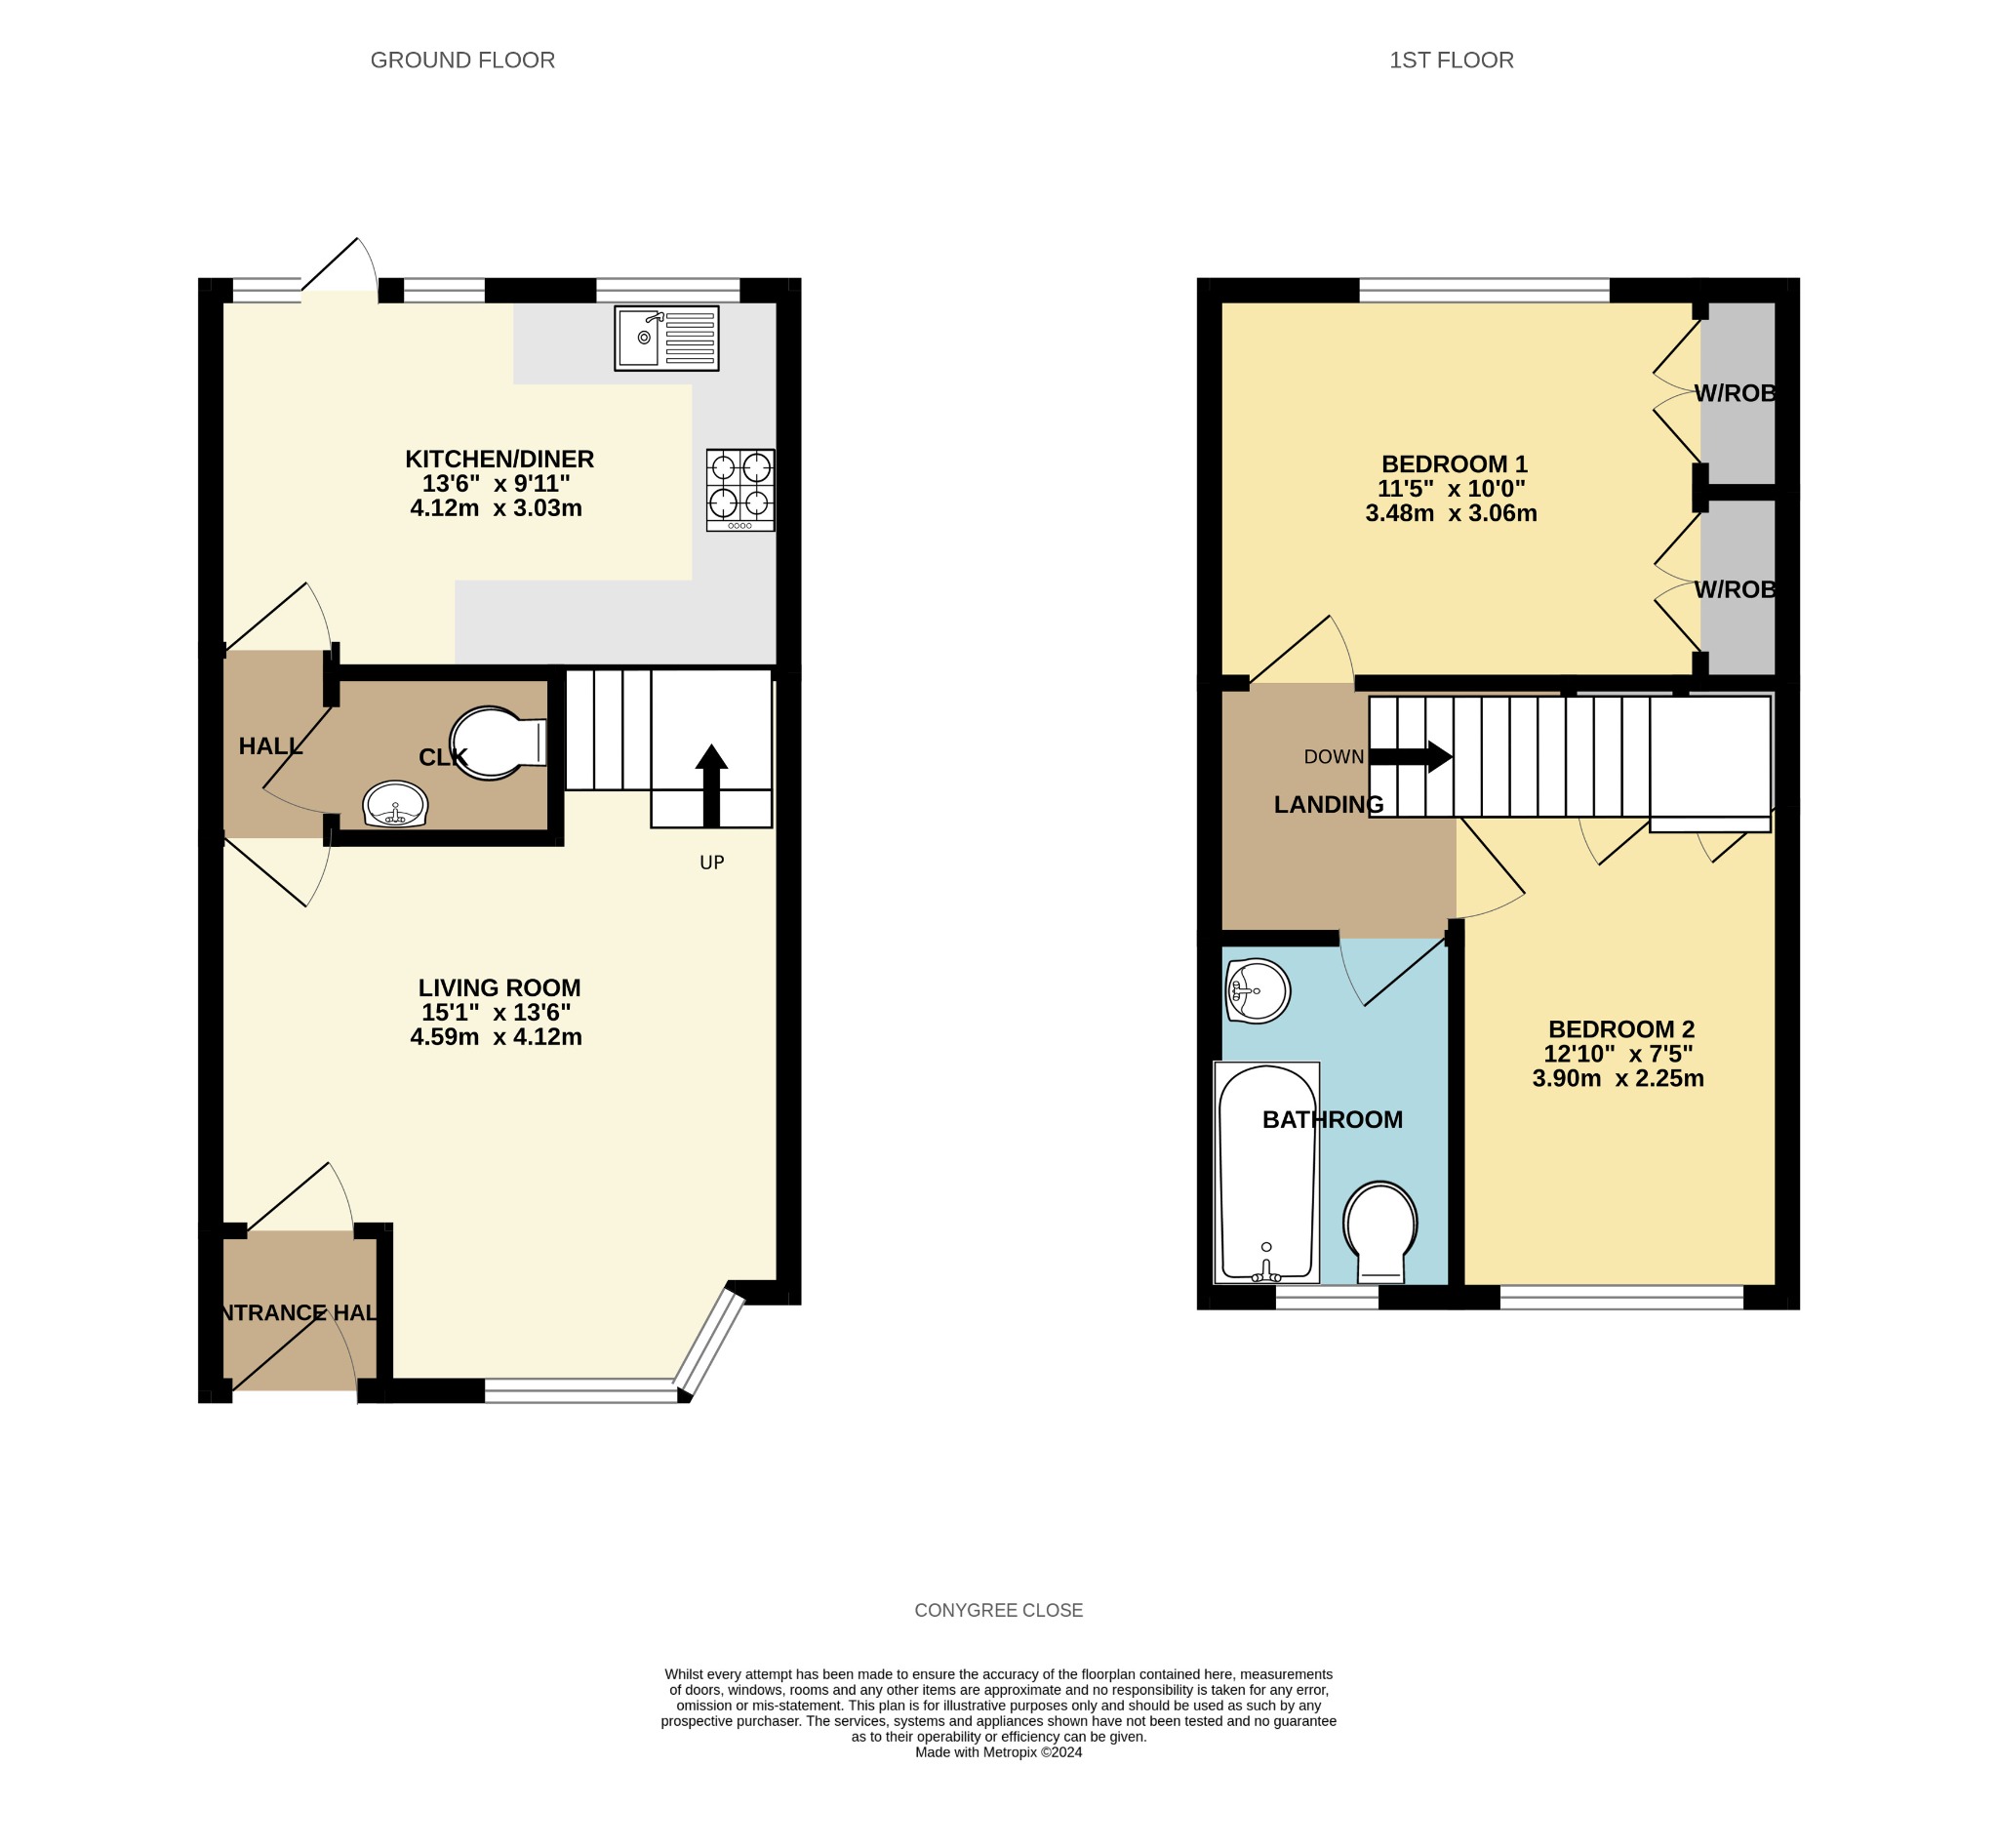 2 bed end of terrace house for sale in Conygree Close, Reading - Property floorplan